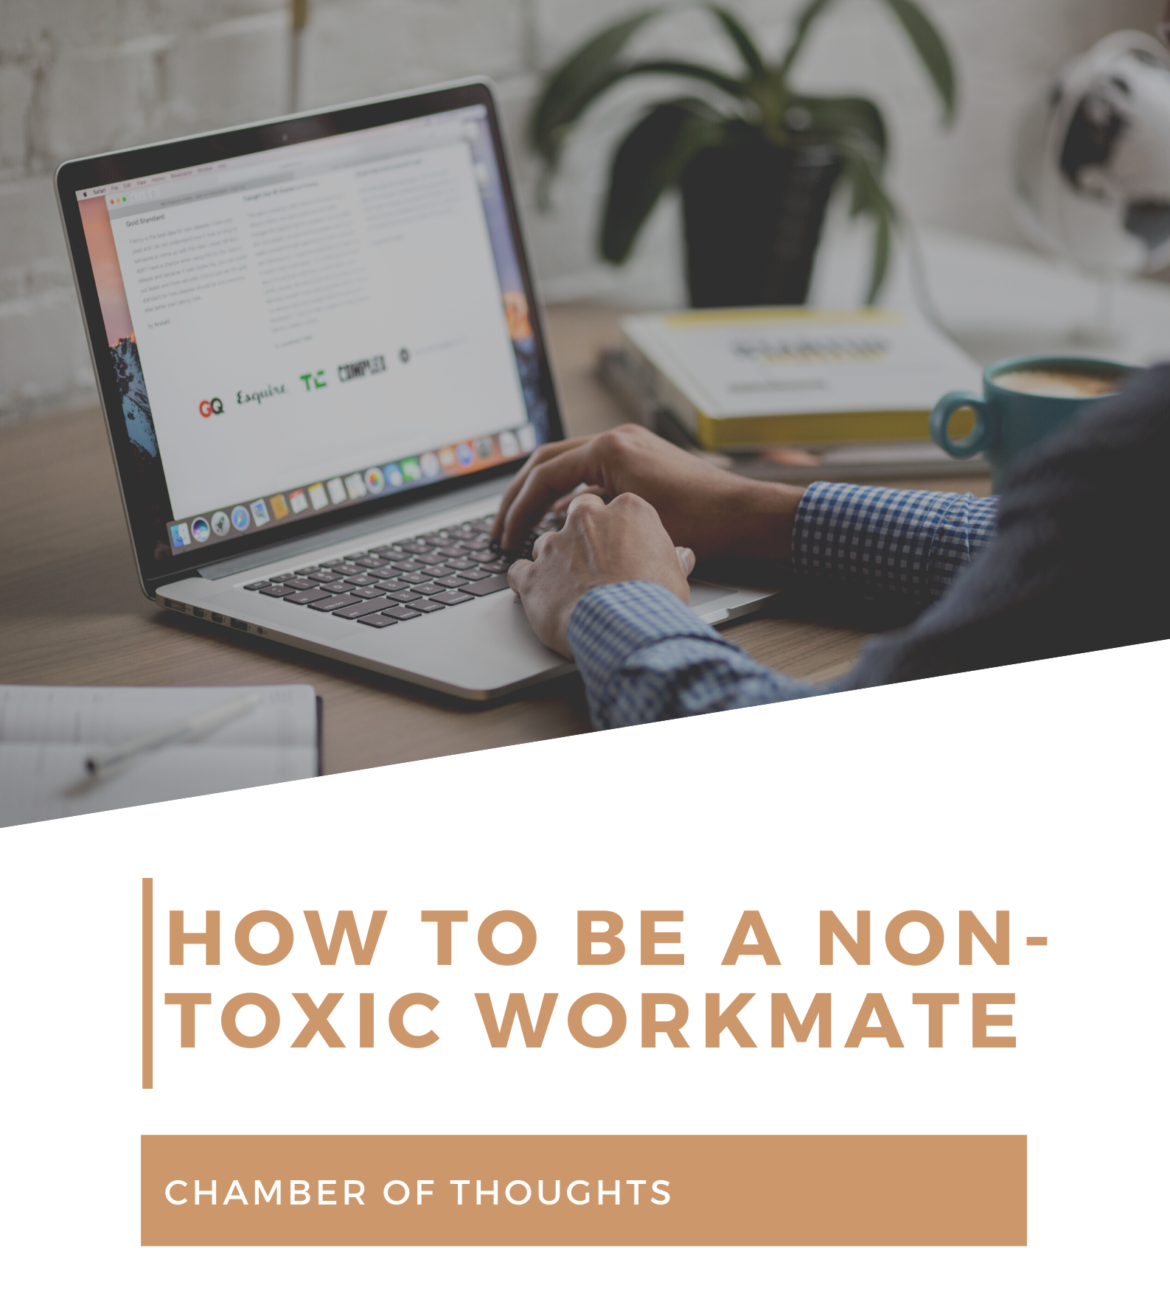 How To Be A Non-Toxic Workmate